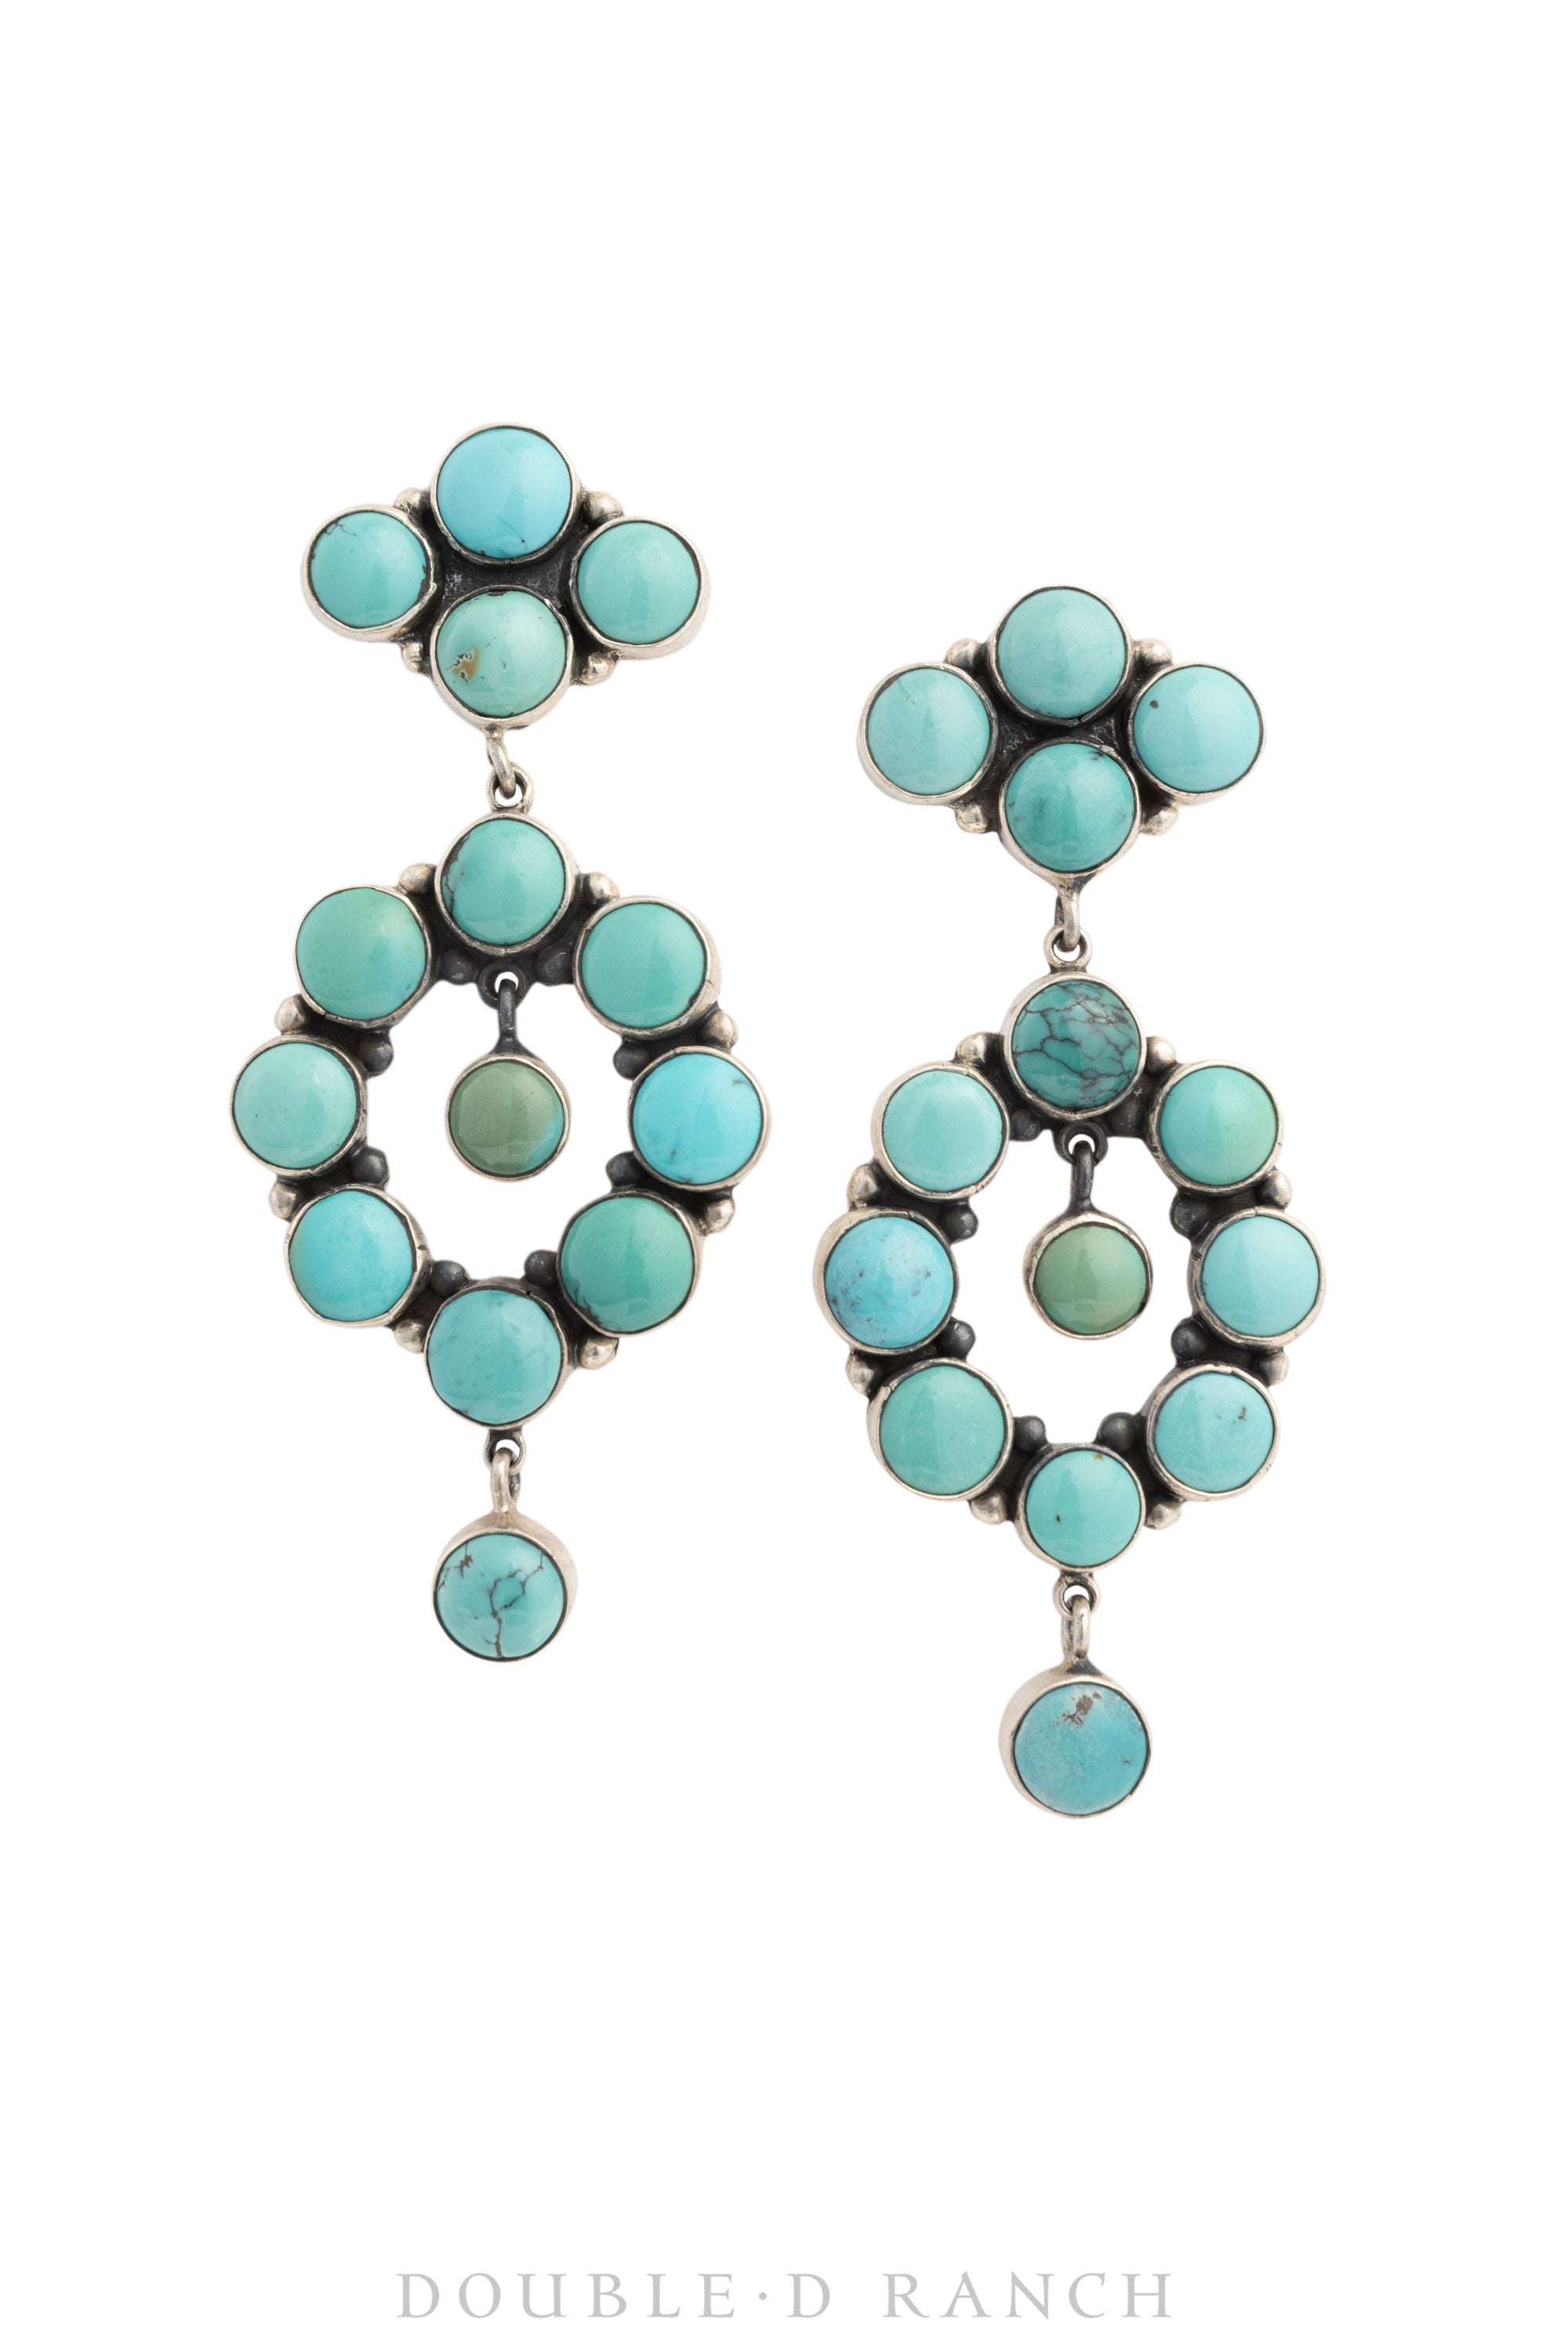 Earrings, Federico, Cluster, Turquoise, Hallmark, Contemporary, 1551